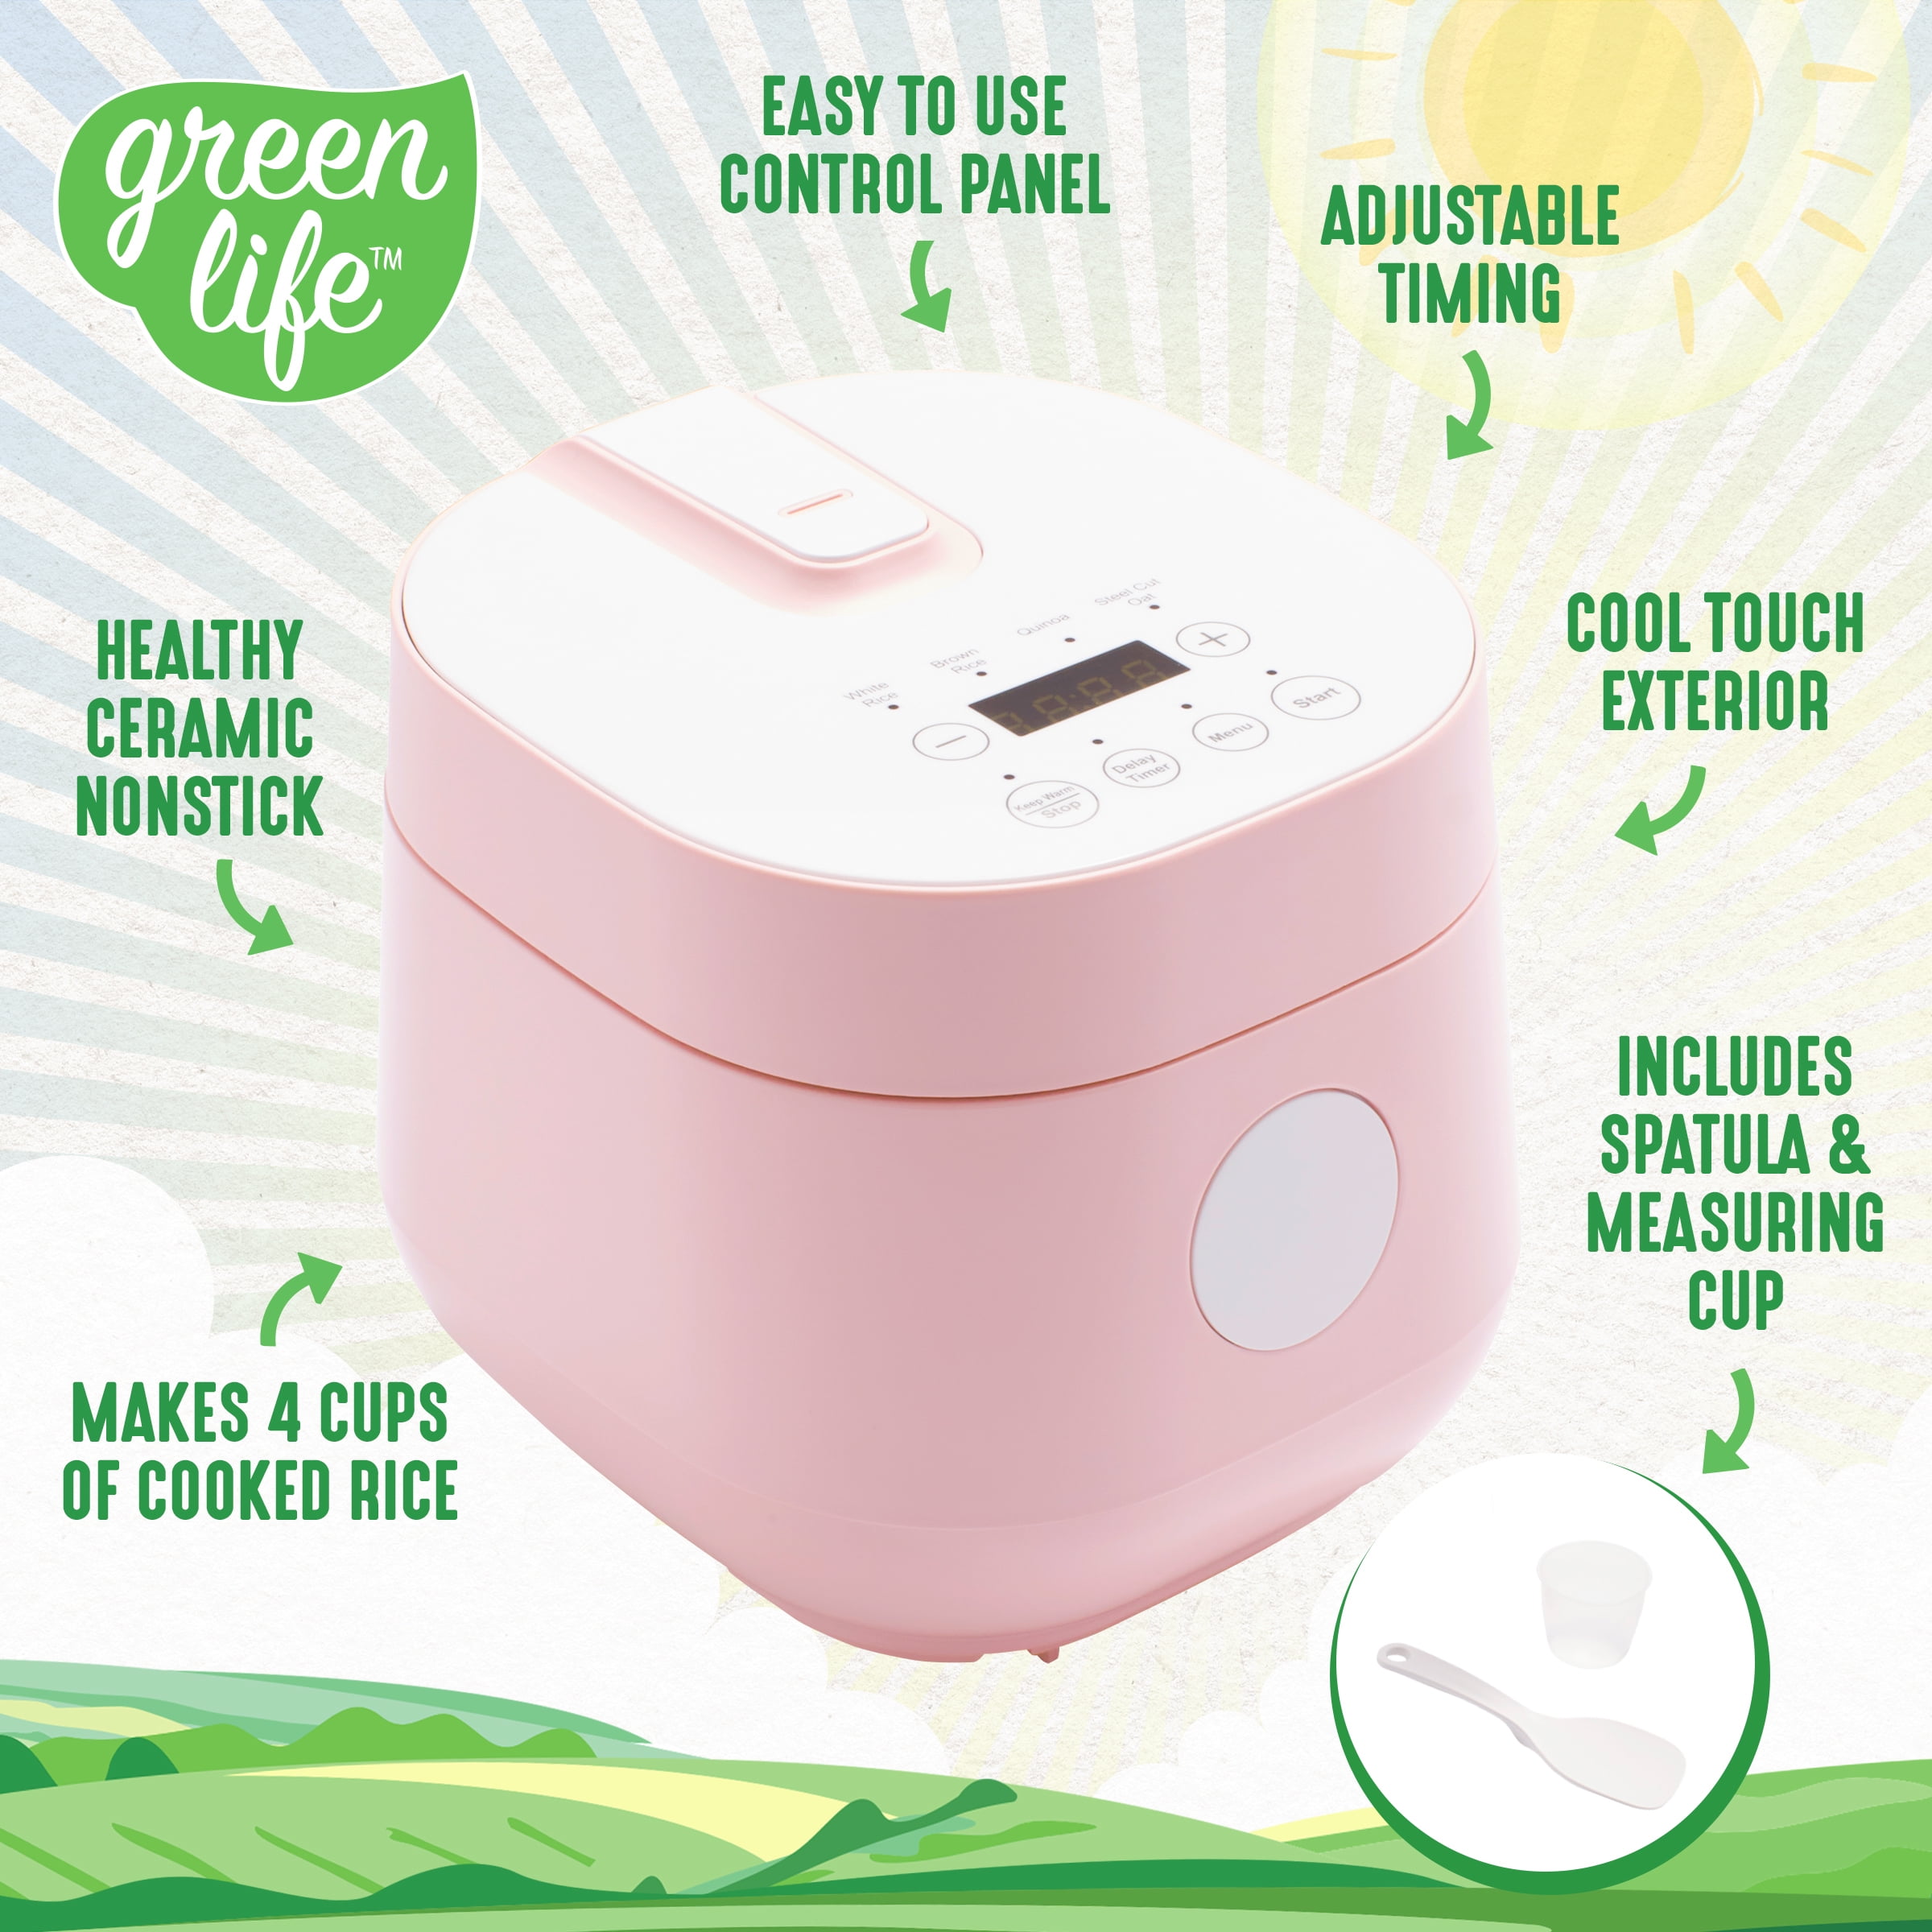 GreenLife Healthy Ceramic Nonstick Go Grains Turquoise Rice and Grains Cooker 